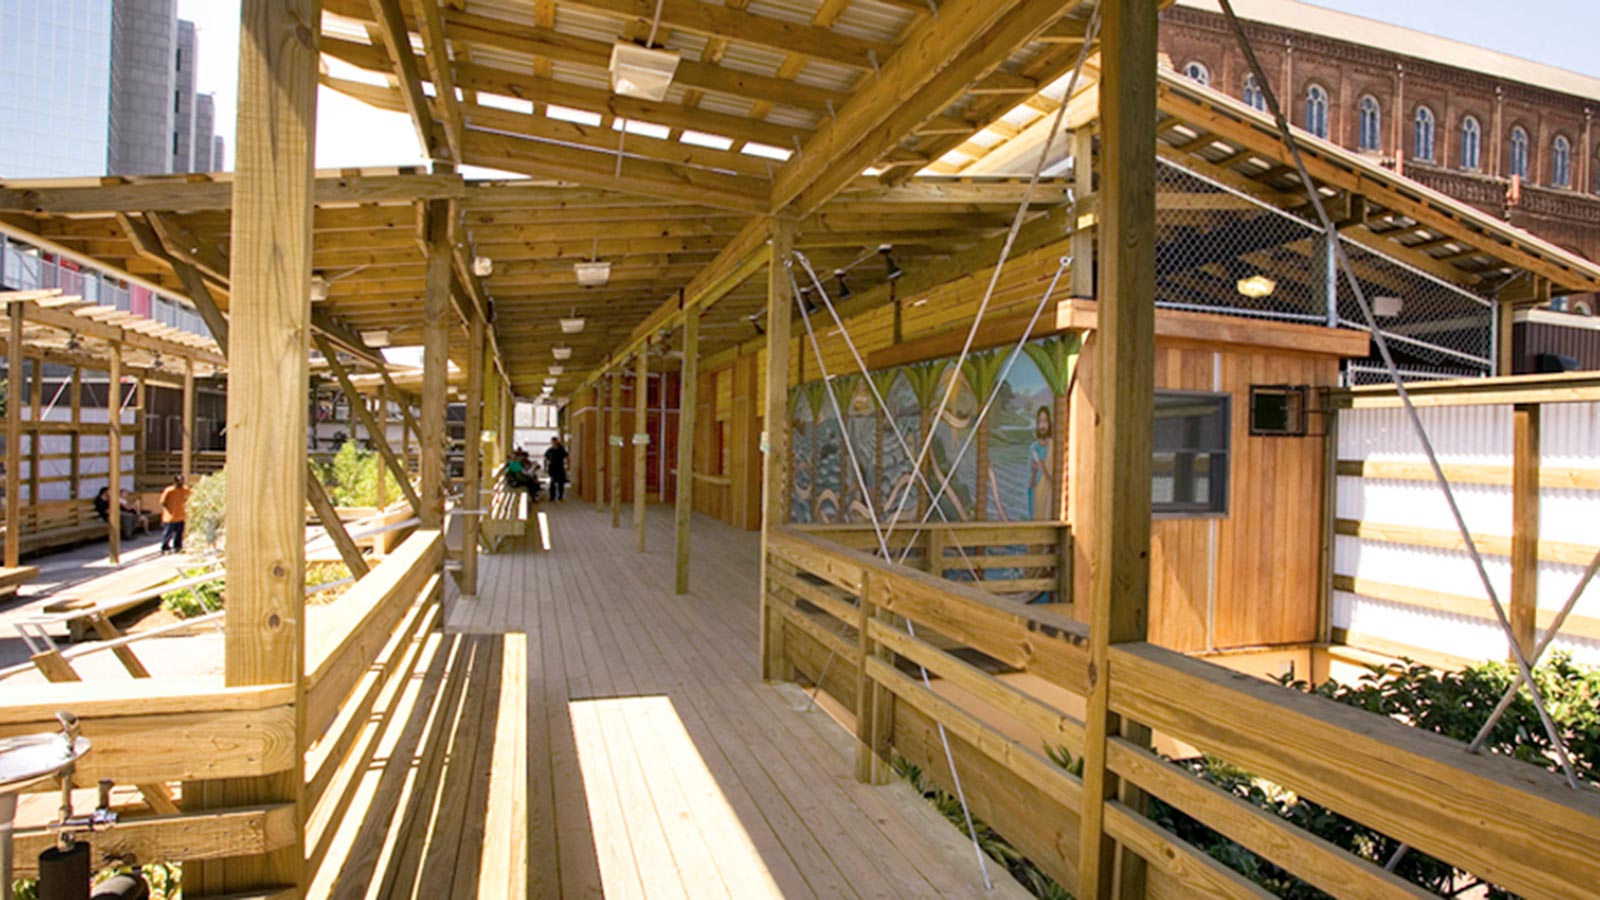 The design of the St Joseph Rebuild Center utilizes six trailers connected by urban outdoor space or plaza used for gathering.